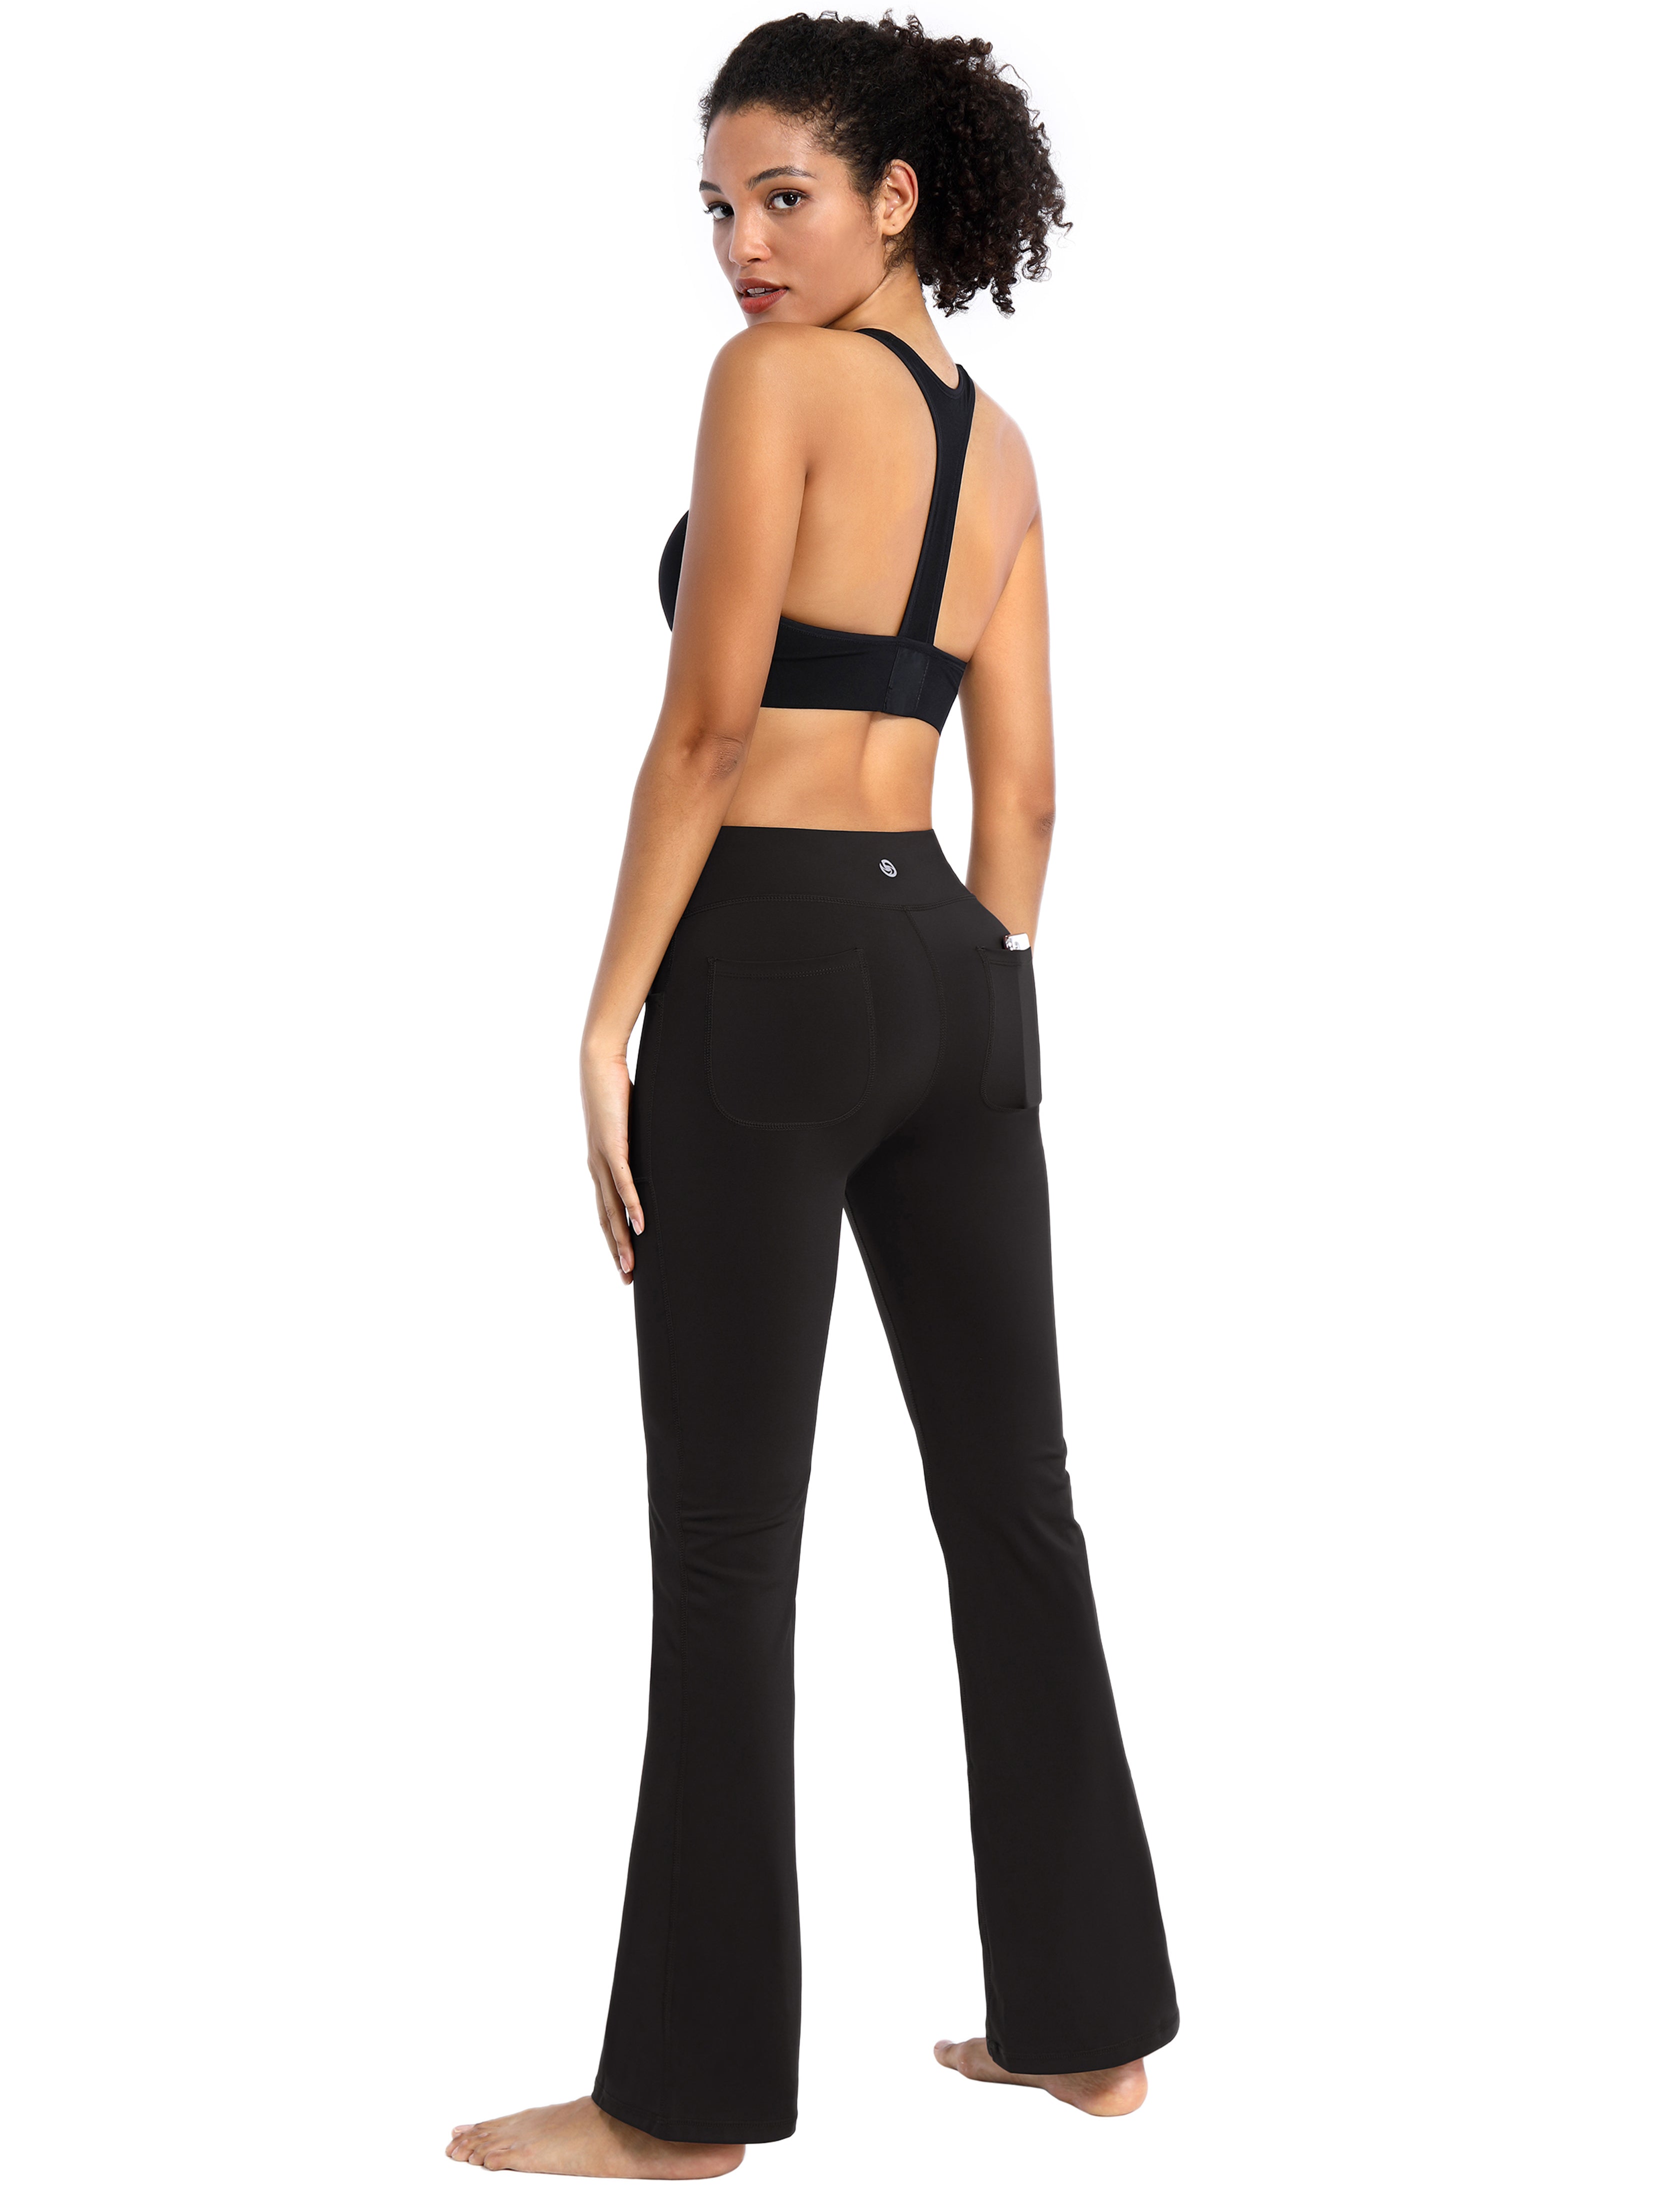 29" 31" 33" 35" Bootcut Leggings with Pockets black_Gym